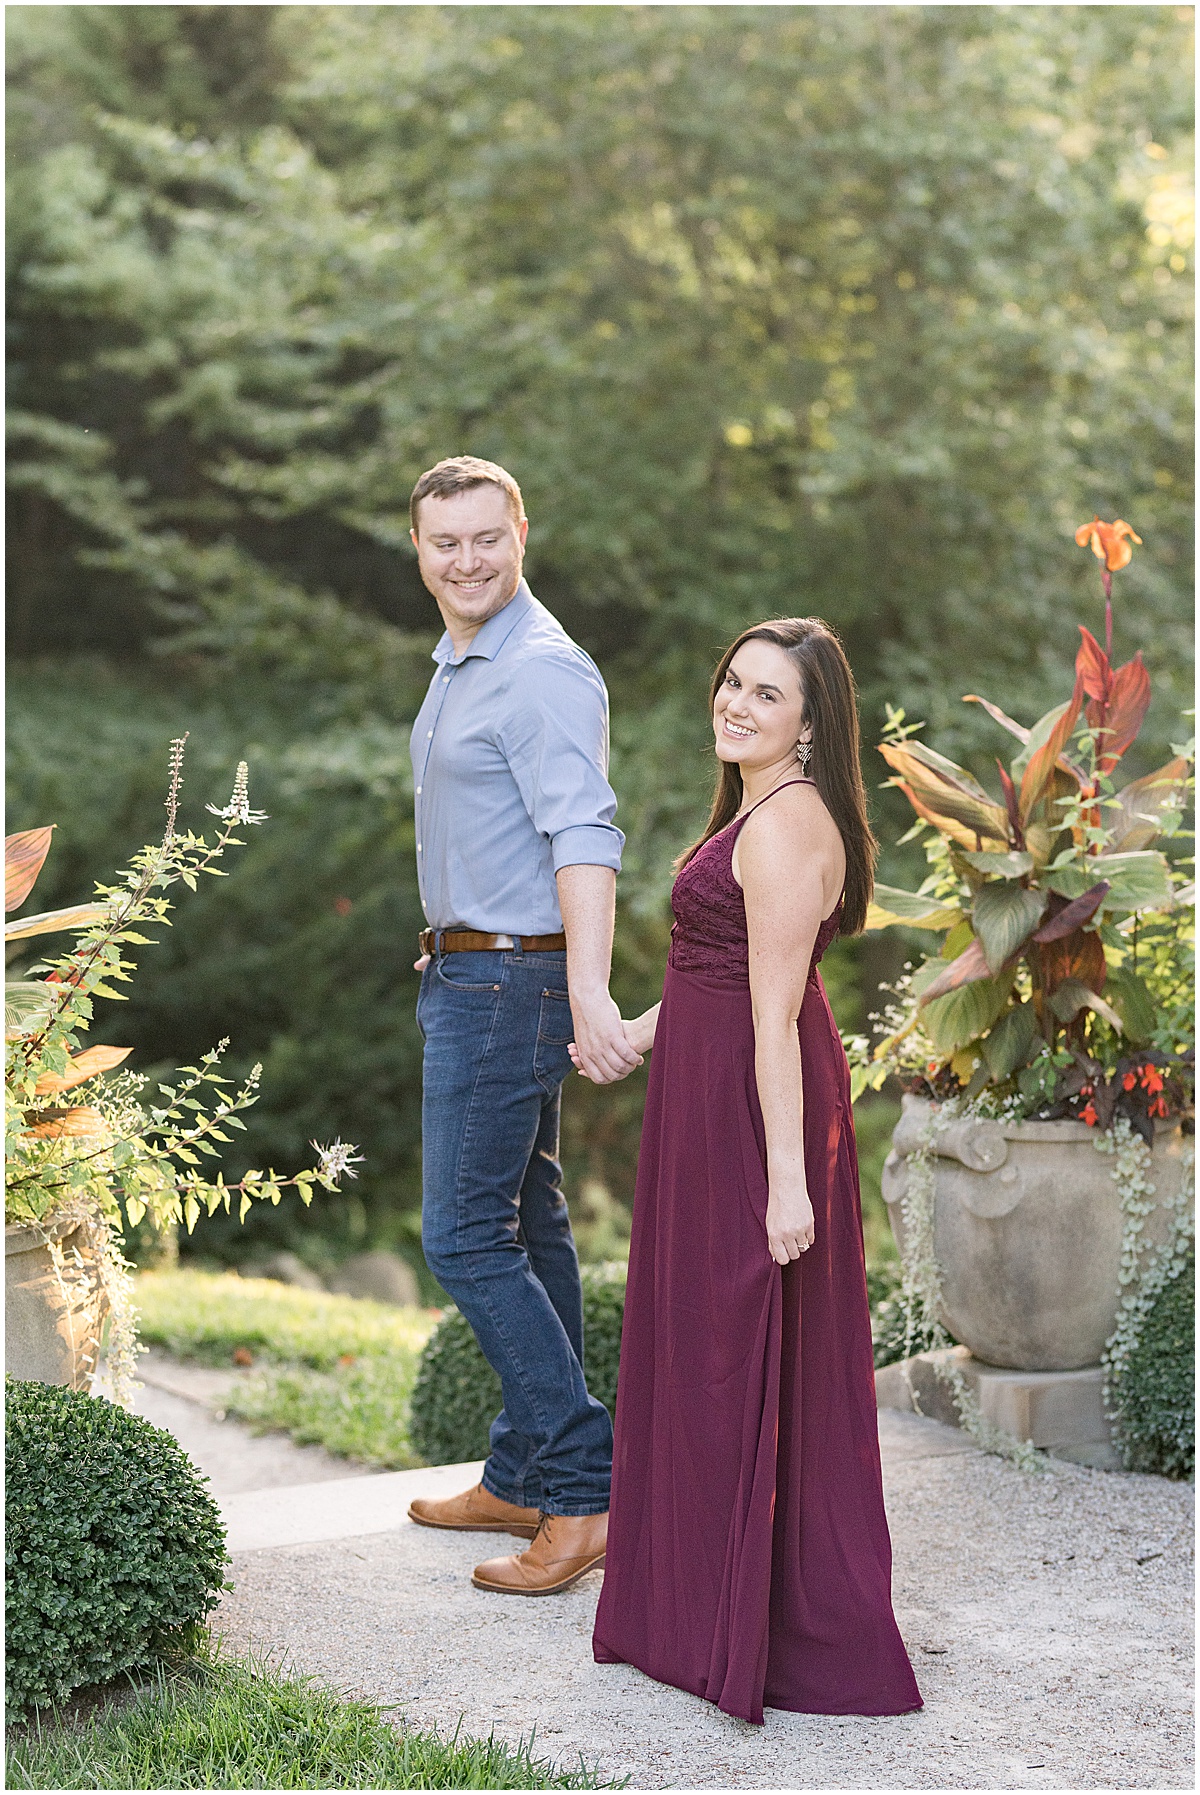 Couple walk on path during jewel tone engagement photos at Newfields